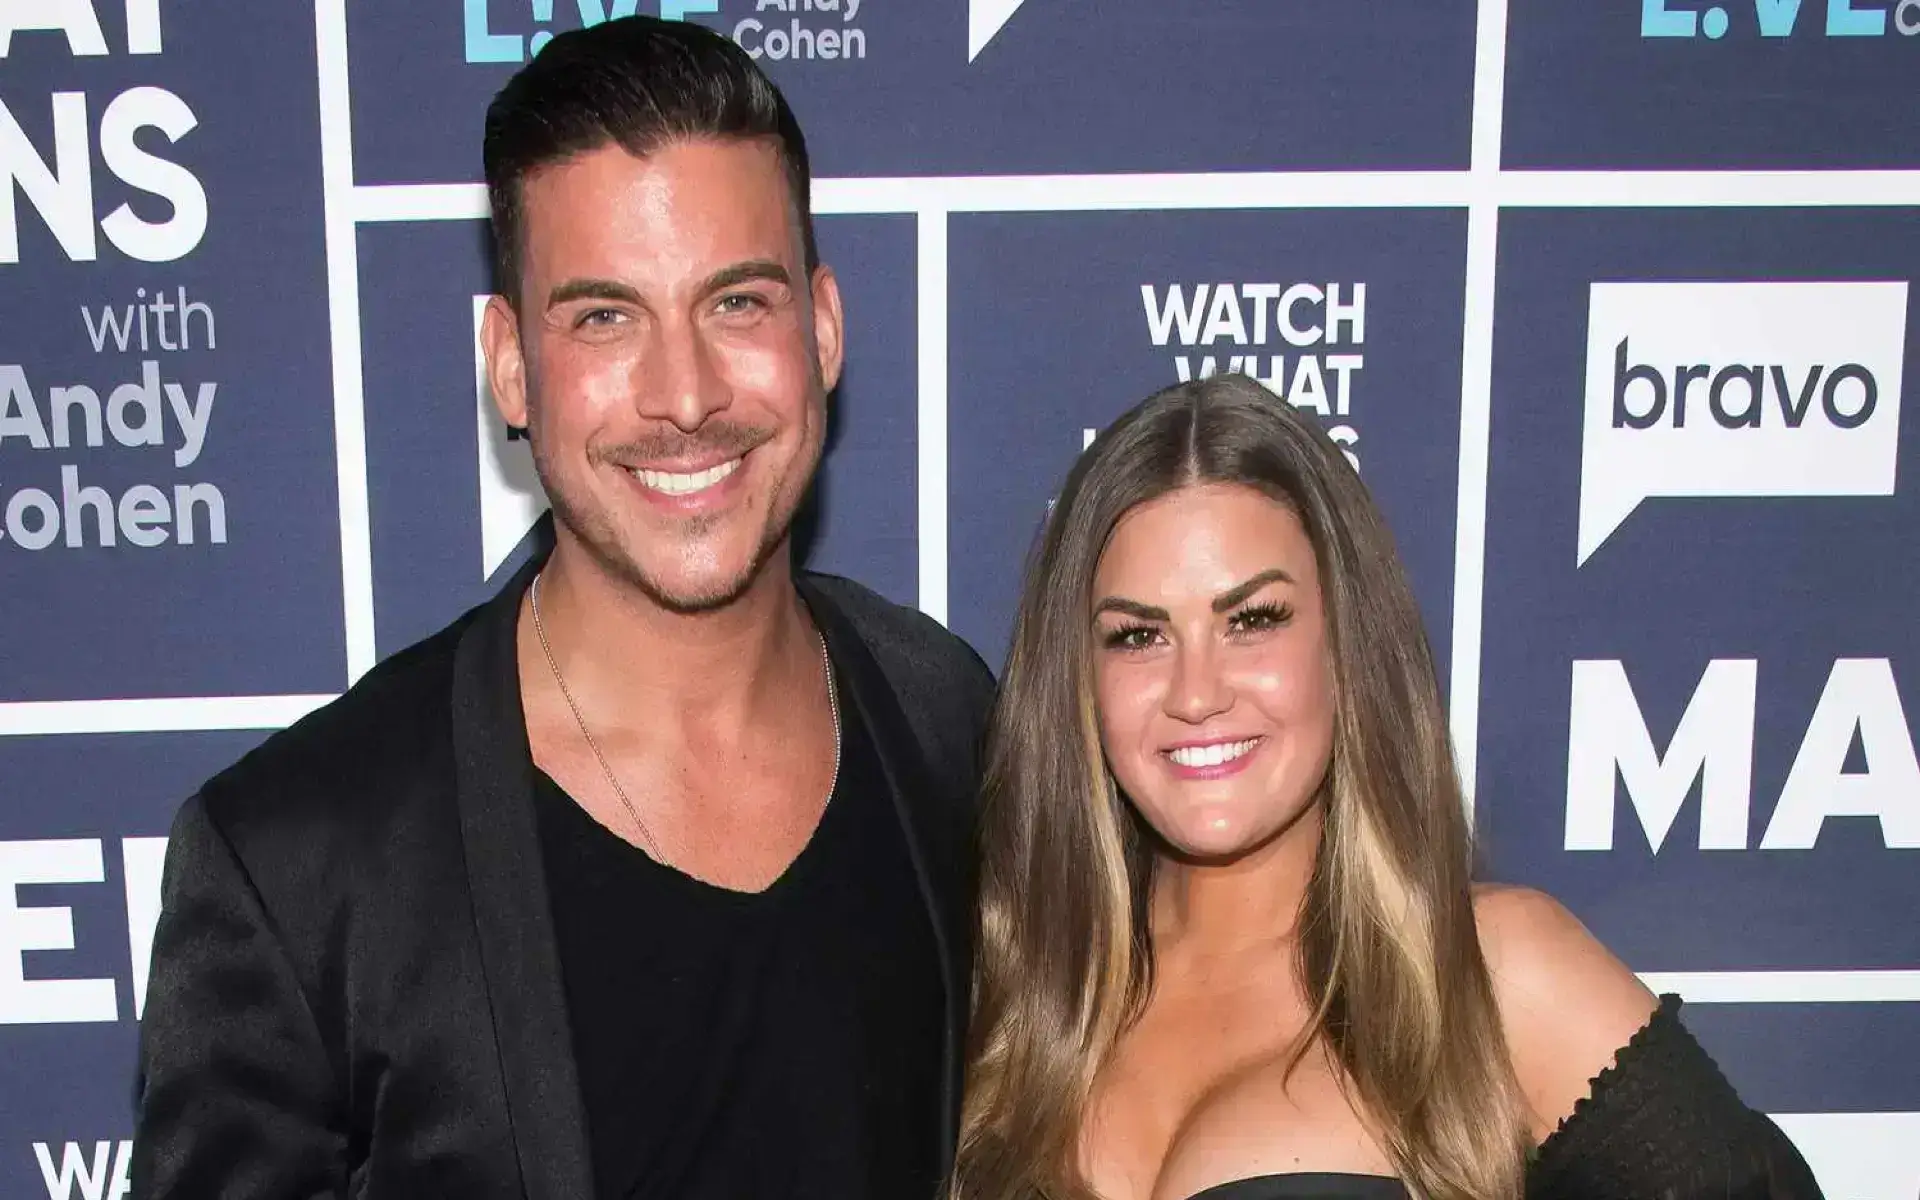 ‘VPR’ Alums Jax Taylor and Brittany Cartwright: A Tale of Separation Despite Claims